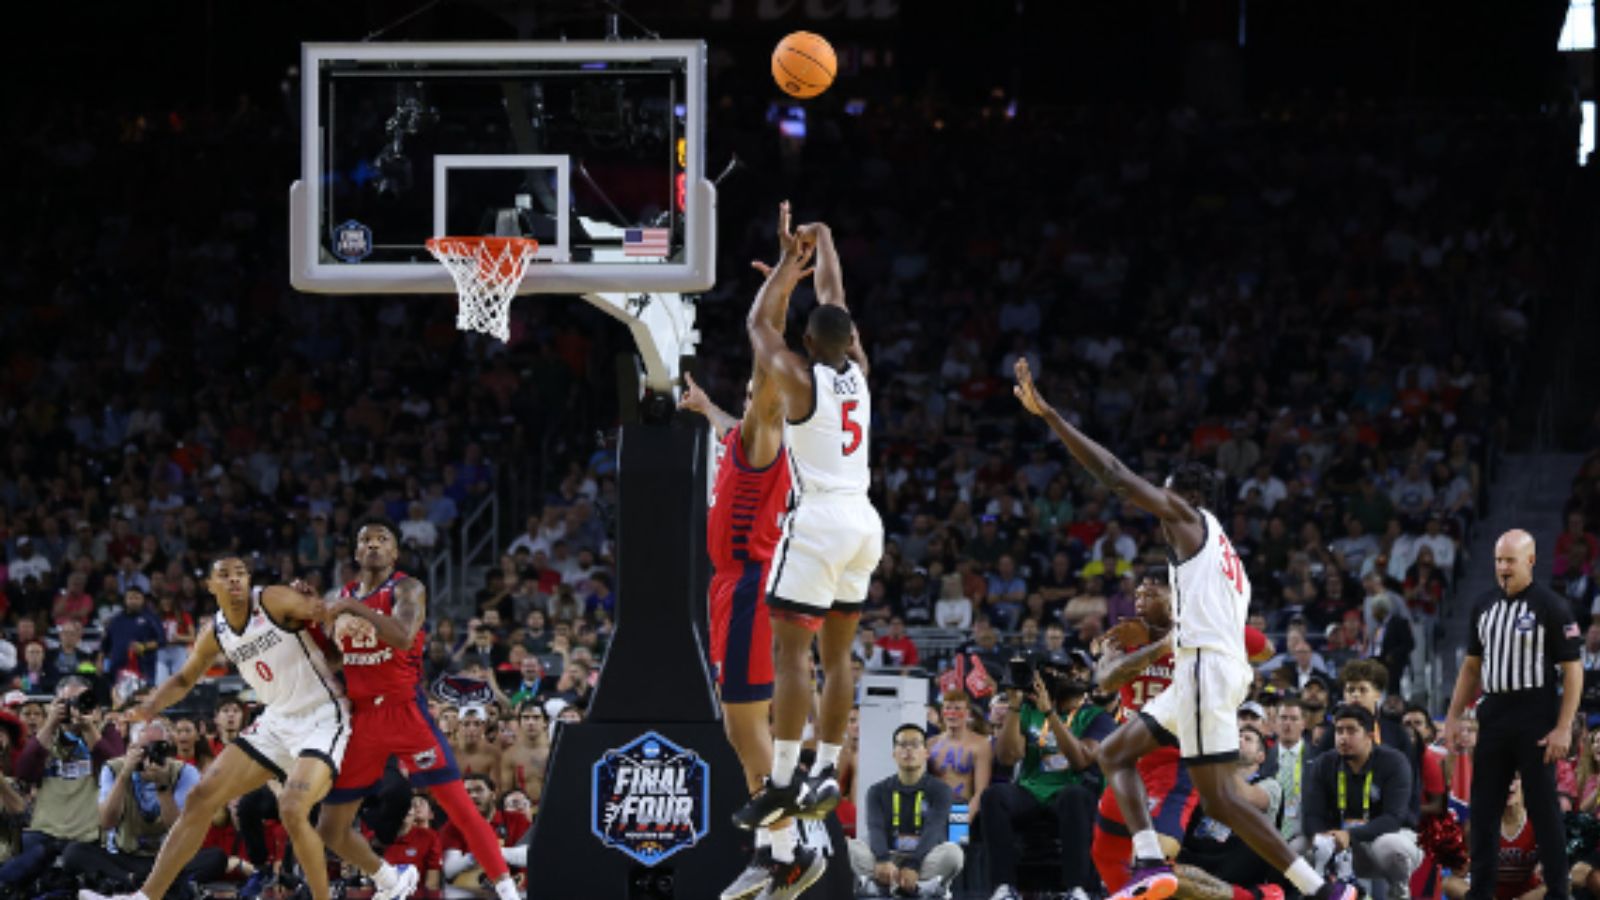 SDSU guard Lamont Butler attempts a shot over an FAU defender during their Final Four game at NRG Stadium in Houston, Texas, Saturday, April 1, 2023. (SDSU)